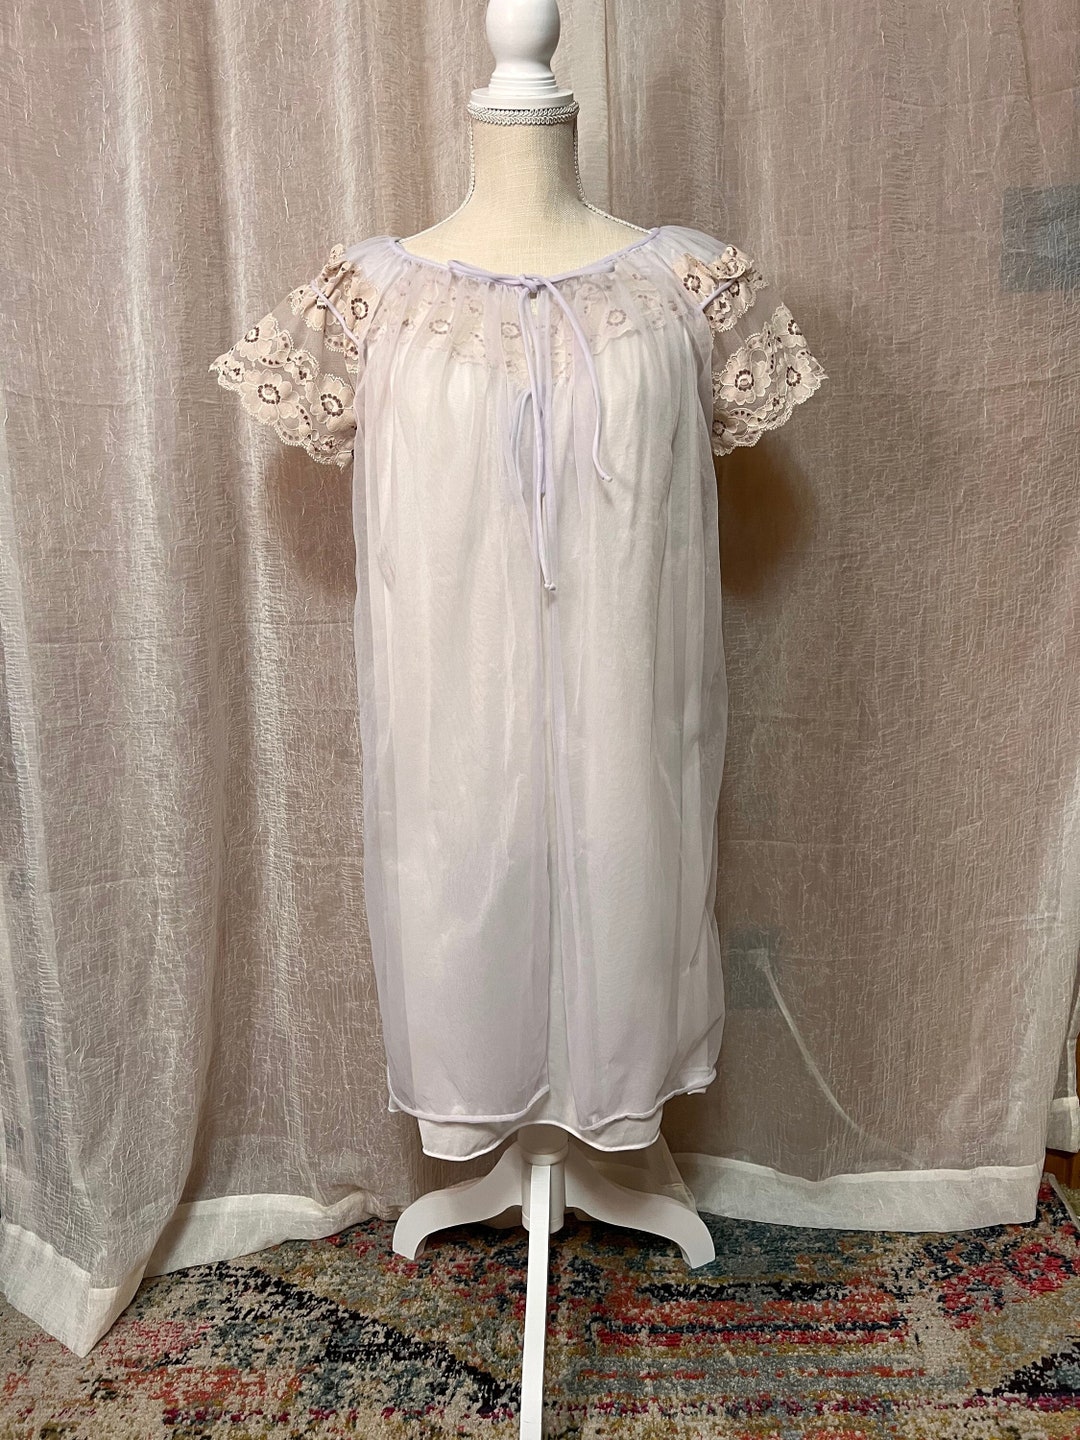 Vintage Negligee and Peignoir Set, Chiffon, Lace, Lilac - Etsy